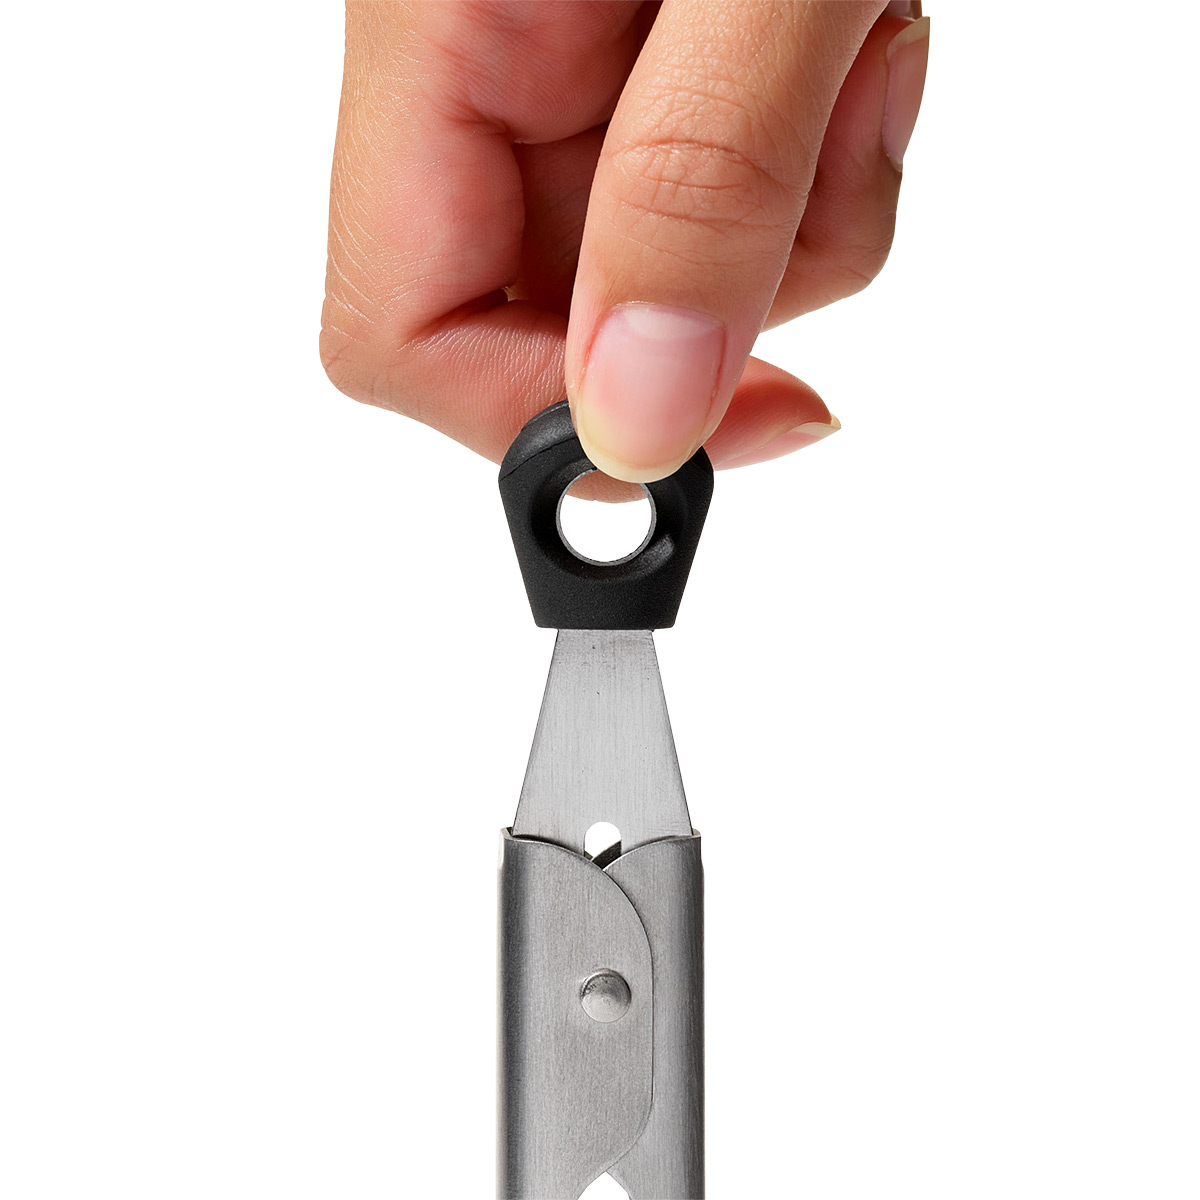 https://www.containerstore.com/catalogimages/394617/10082368-OXO-Mini-Tongs-VEN6.jpg